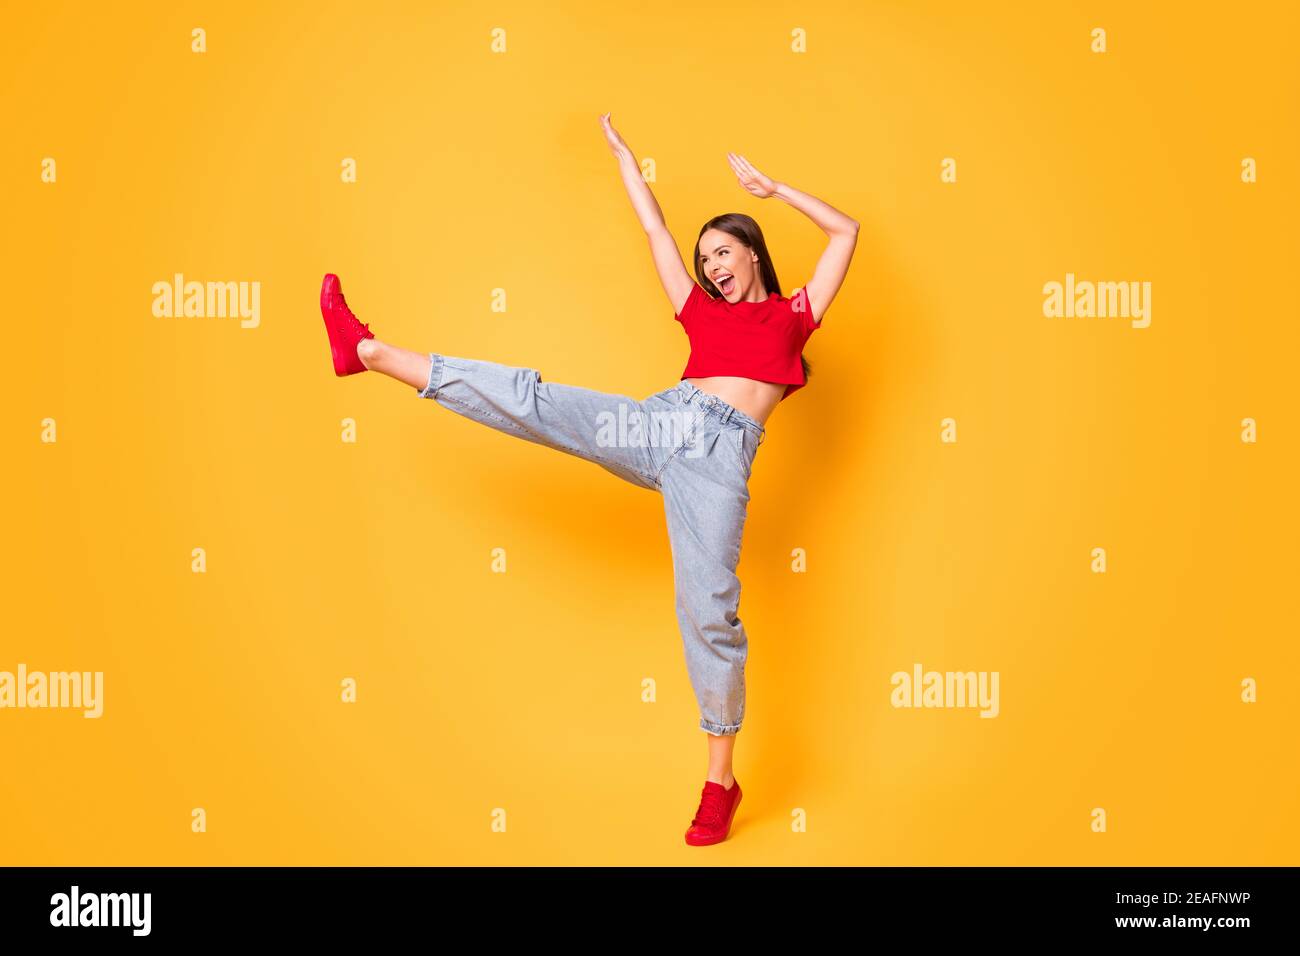 Full size photo youngster girl rejoicing raise leg hands dance floor party wear red crop top jeans isolated yellow color background Stock Photo